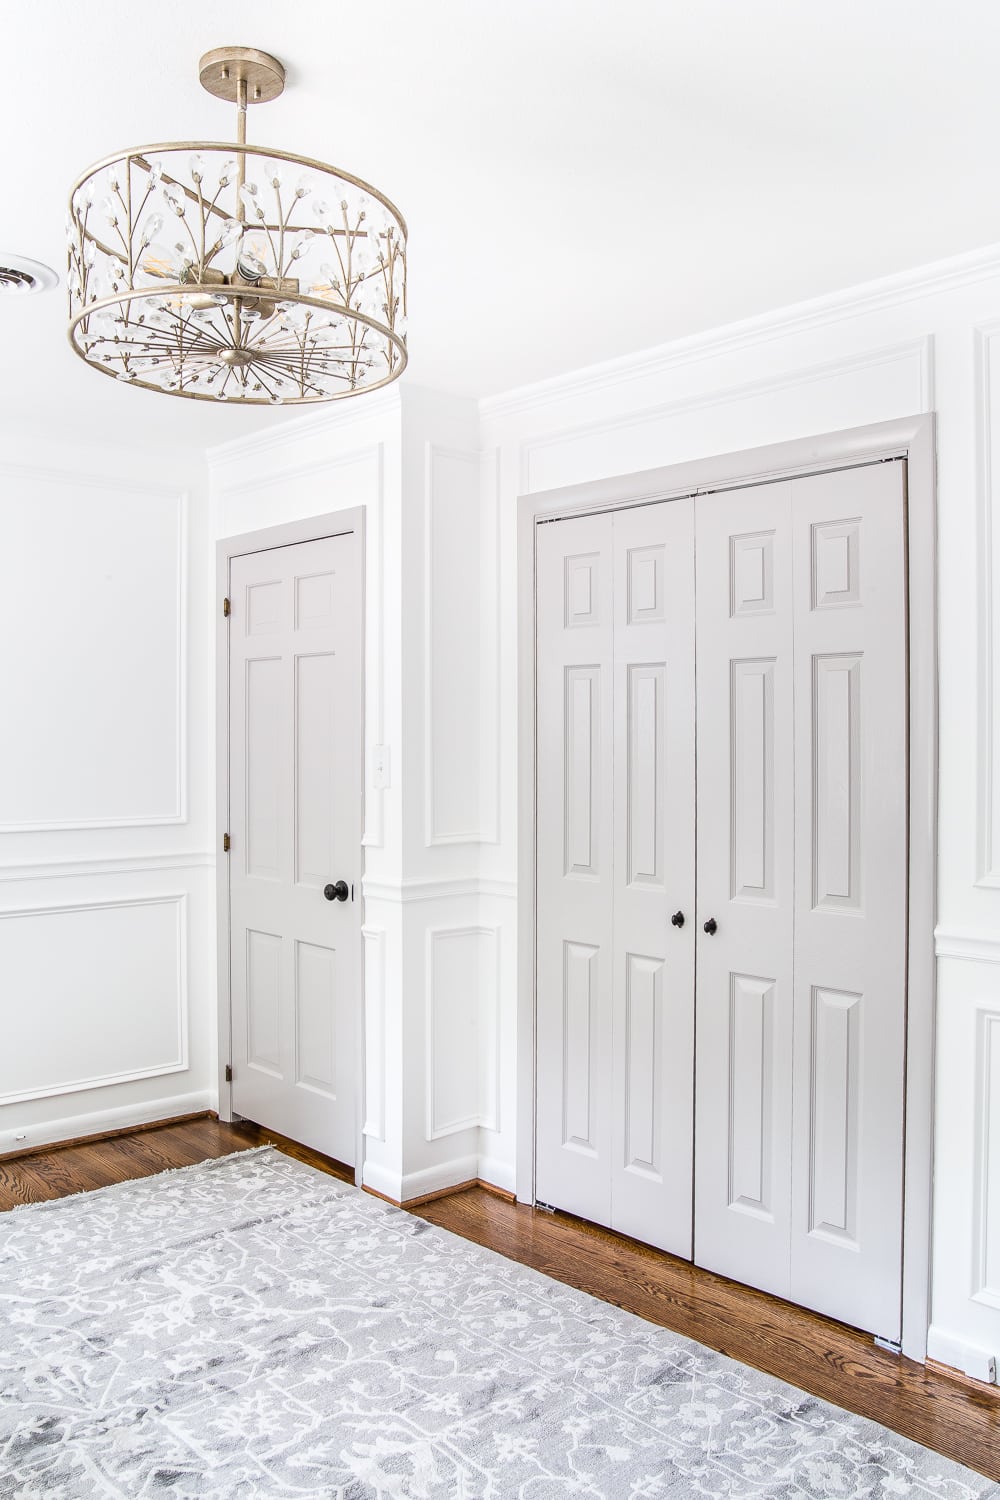 gray painted interior doors with white walls in a nursery